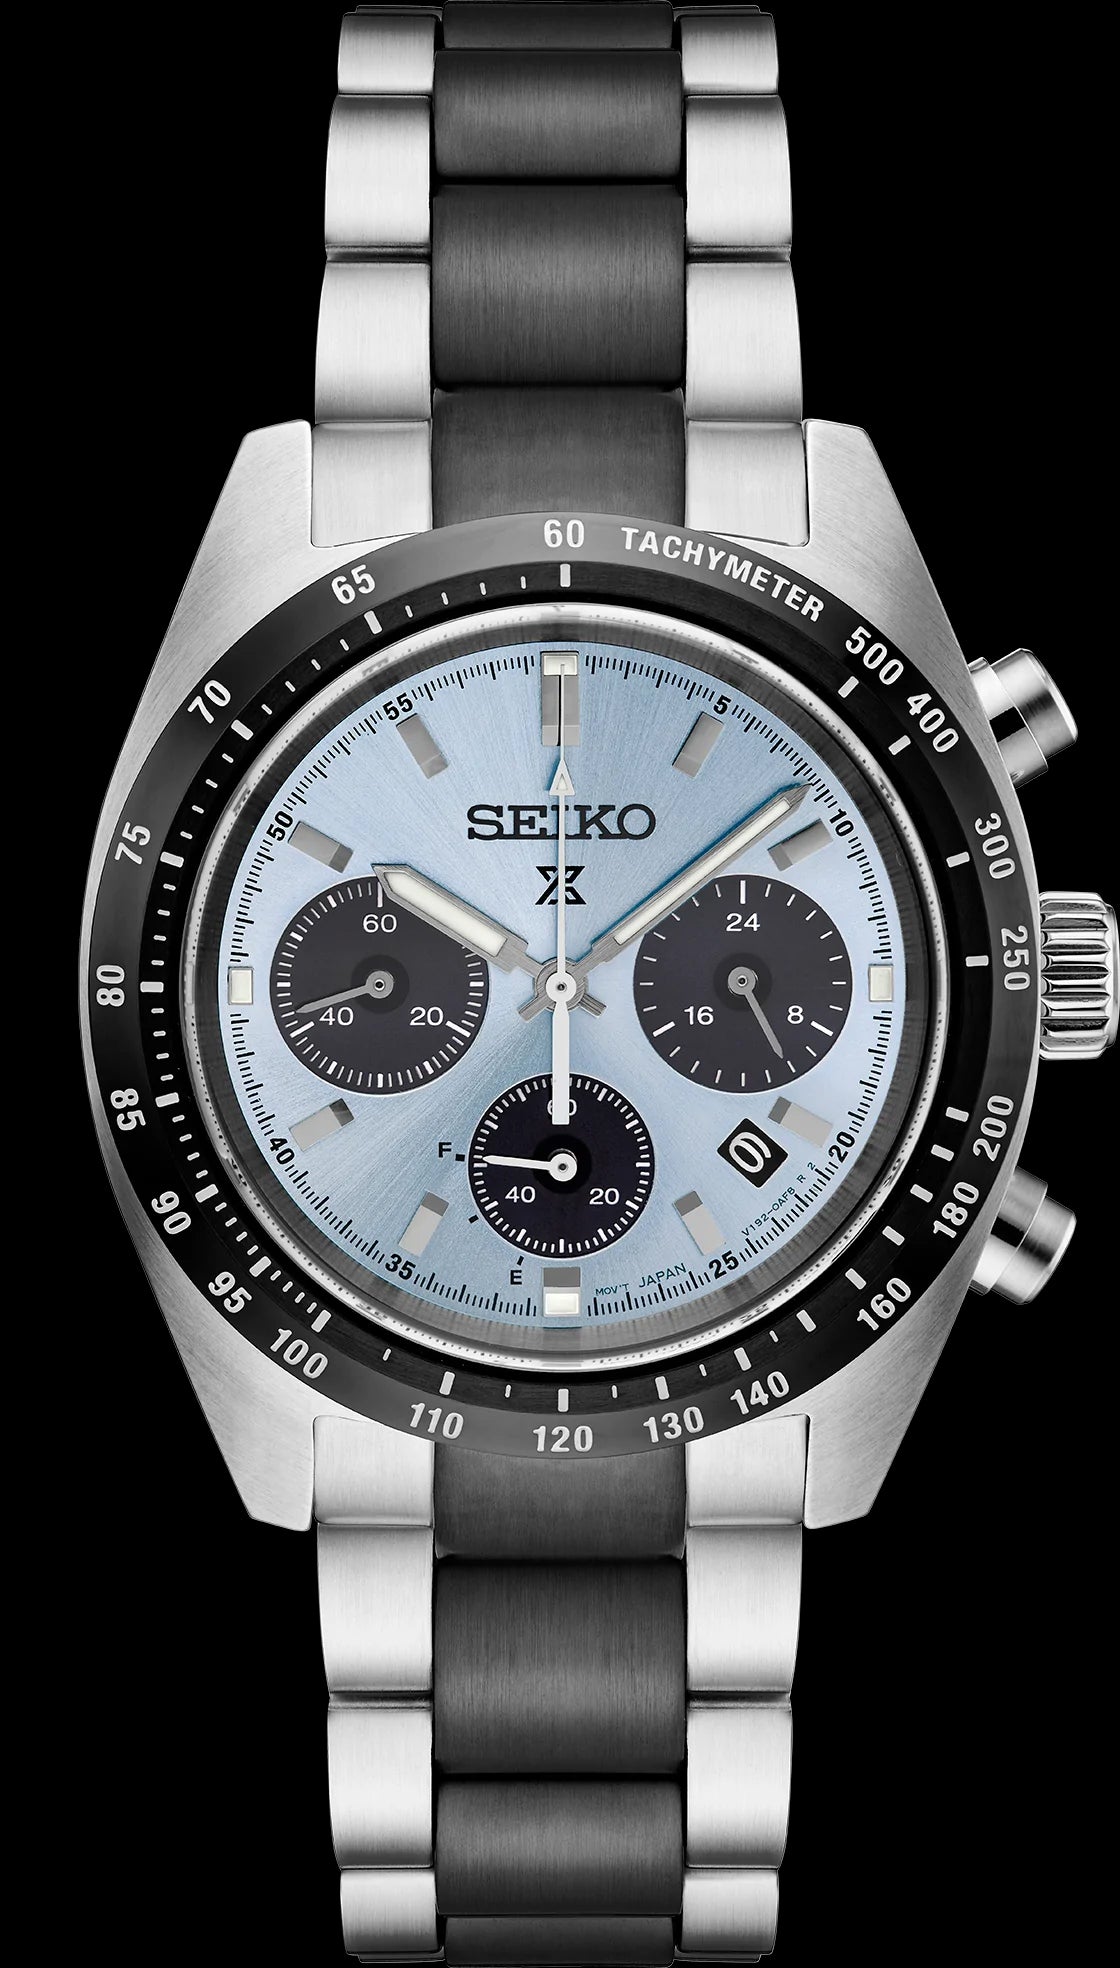 Seiko Prospex Solar LE Crystal Trophy Men's Stainless Steel Chronograph Watch SSC909P1 Ice Blue Panda